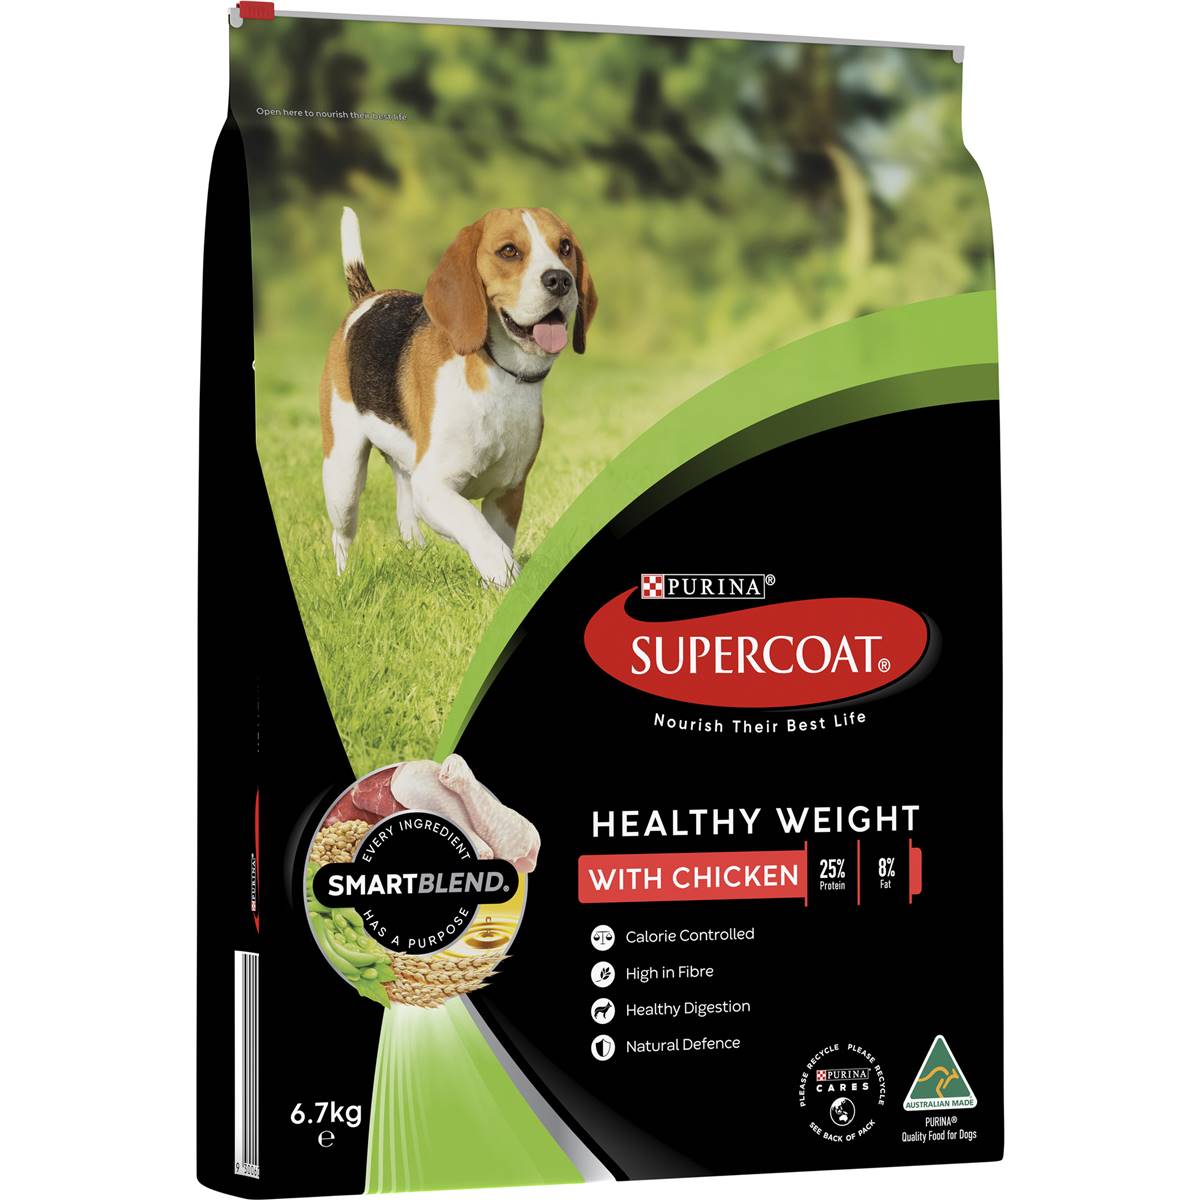 Supercoat Adult Healthy Weight Chicken Dog Food 6.7kg